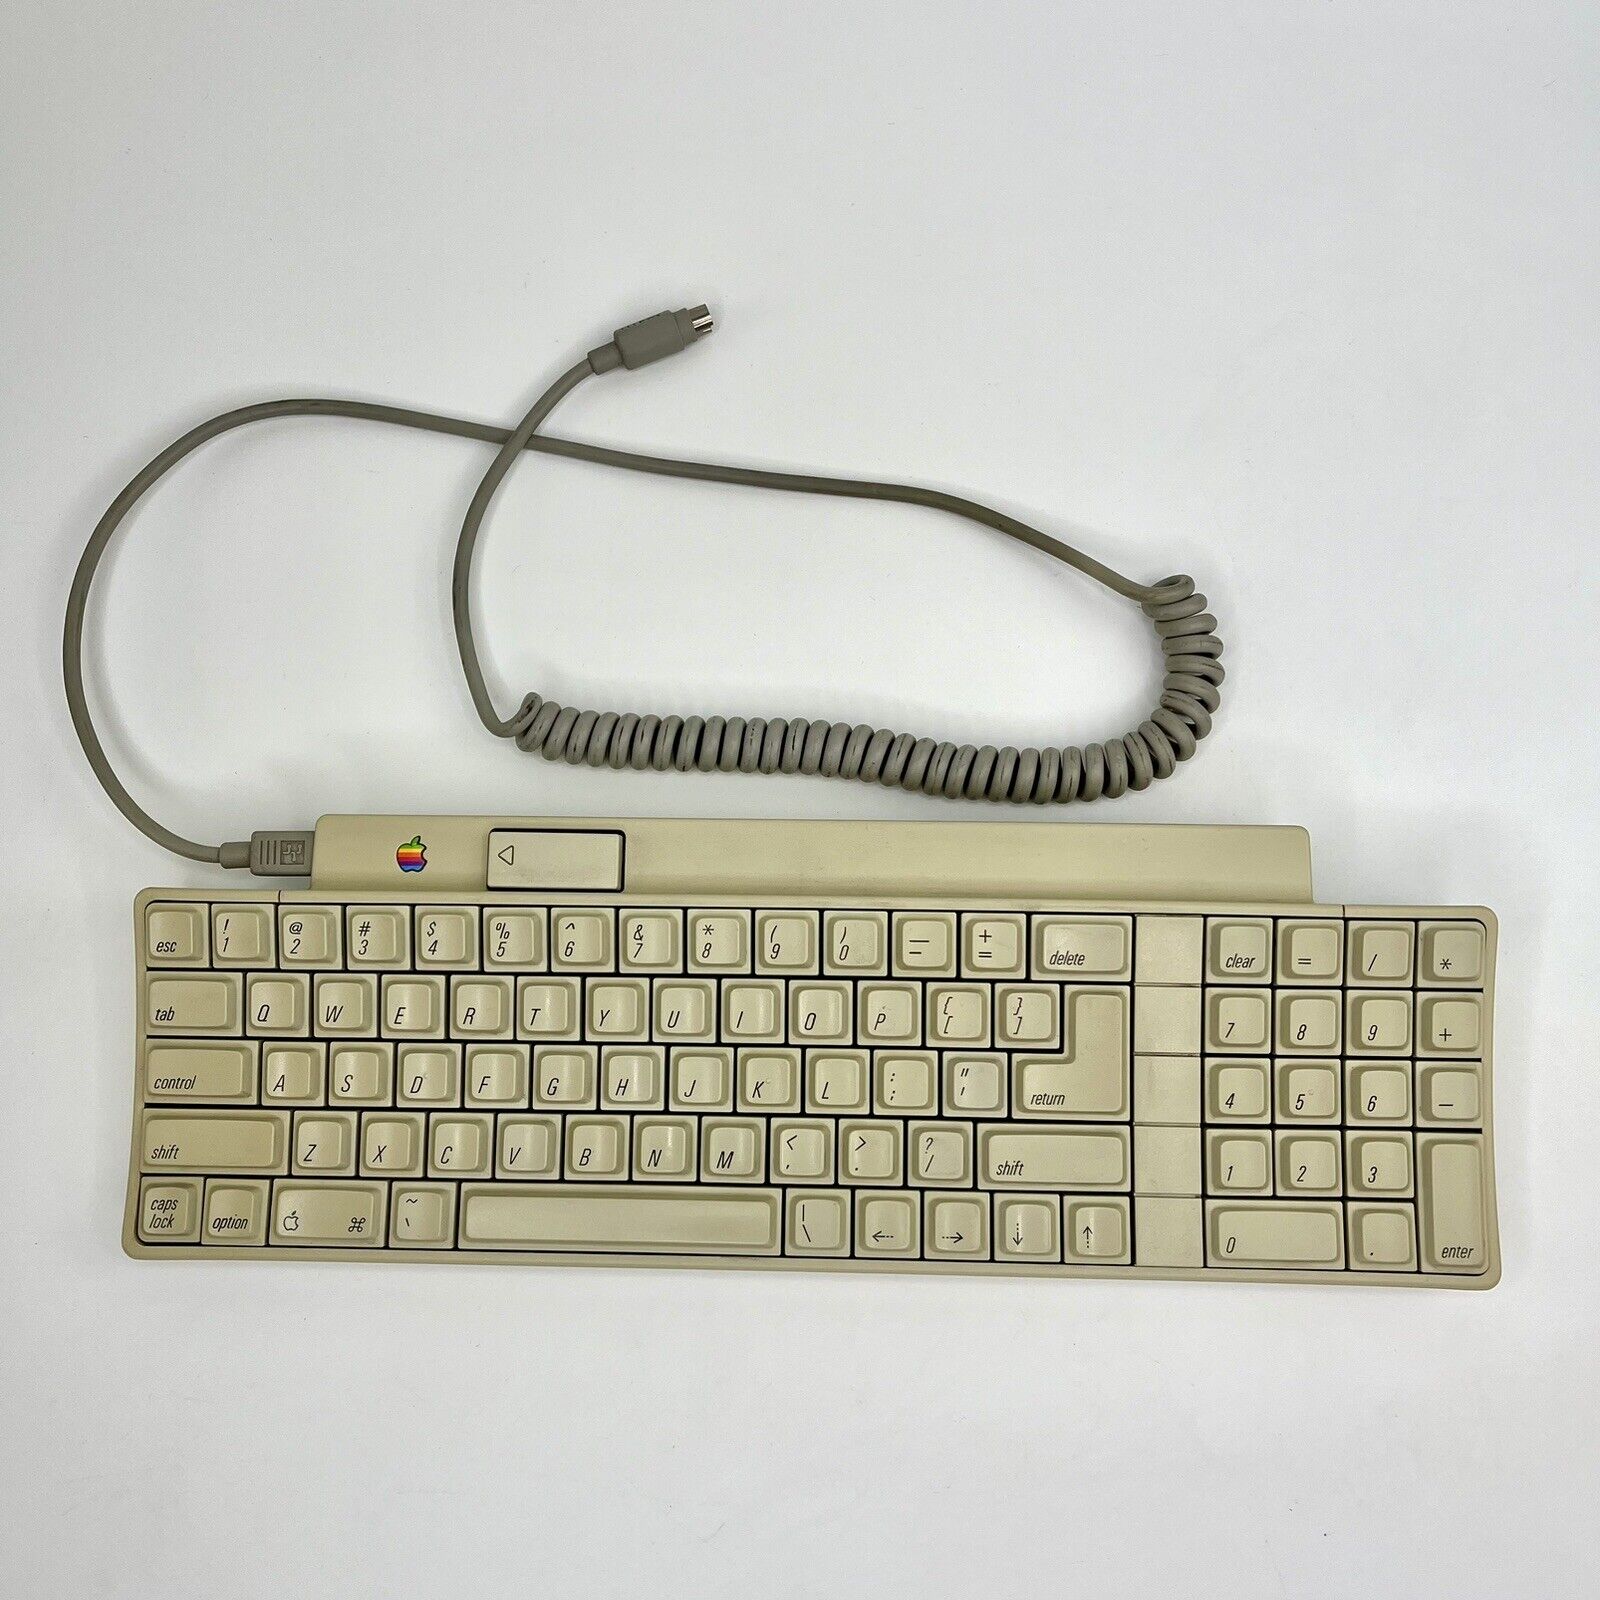 Vtg Apple Desktop Bus Keyboard w/ Cable for Apple IIgs A9M0330 - Tested - READ